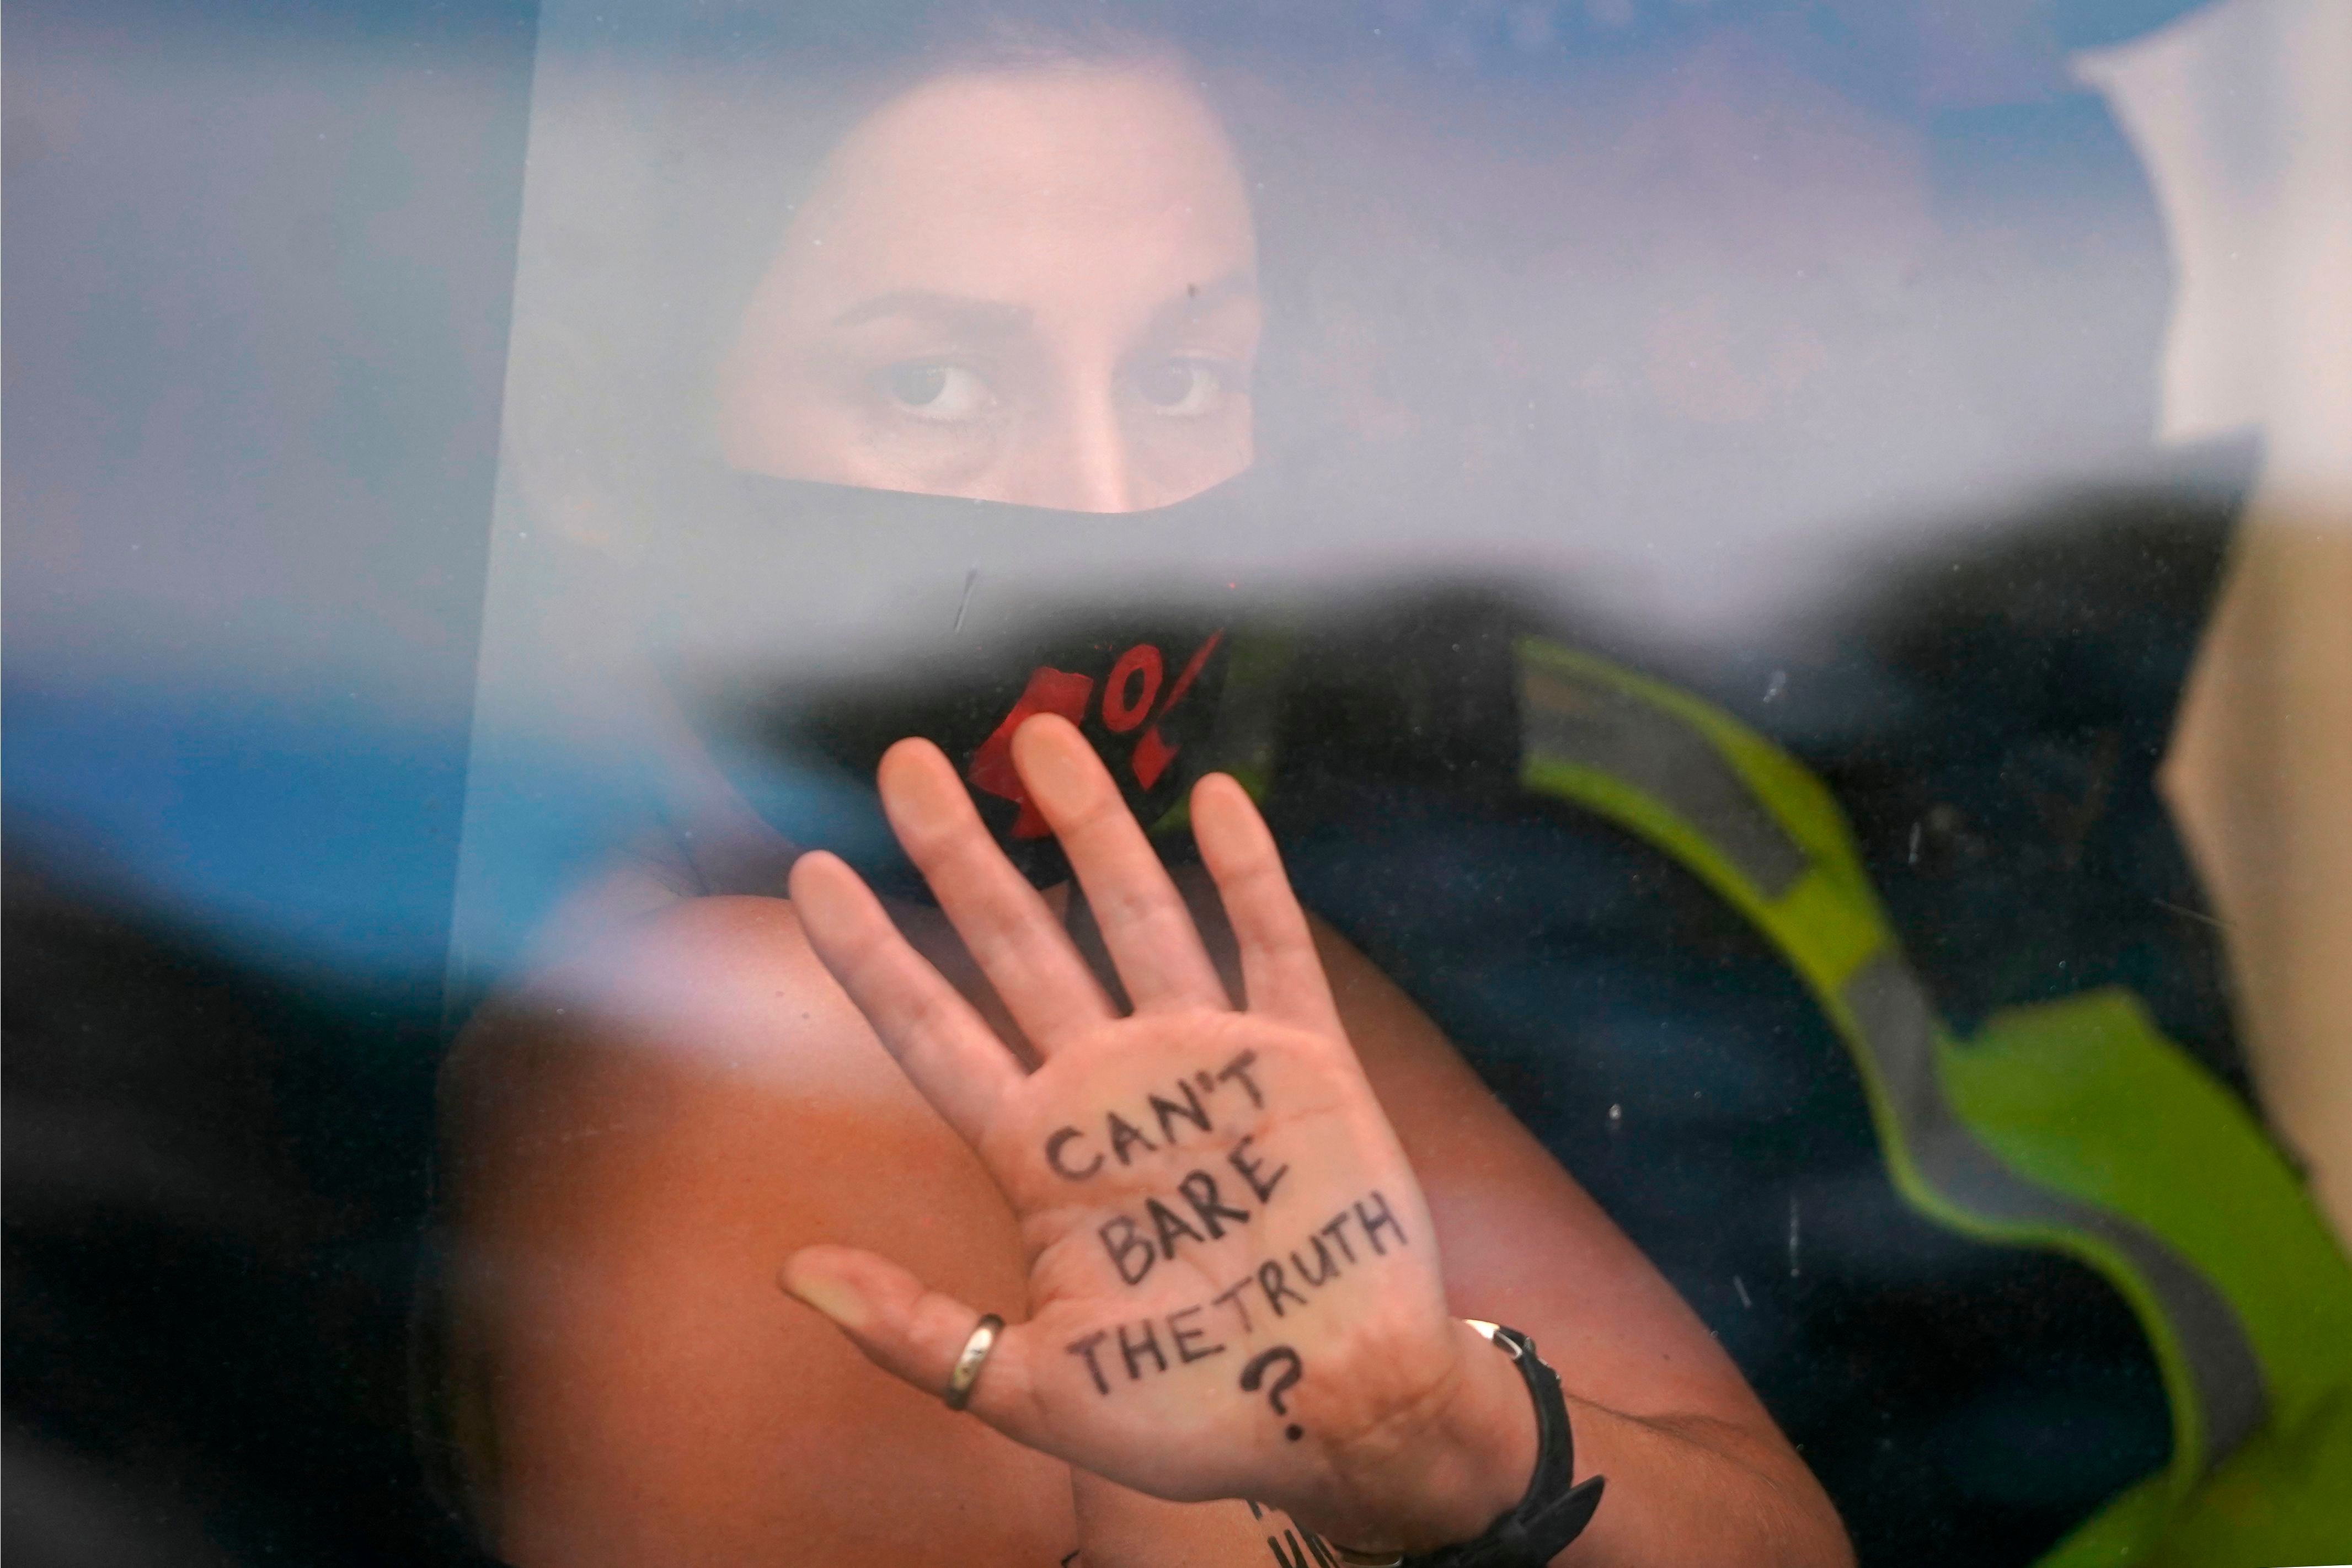 An activist from the Extinction Rebellion climate change group shows a message written on her hand as she is taken away in a police van